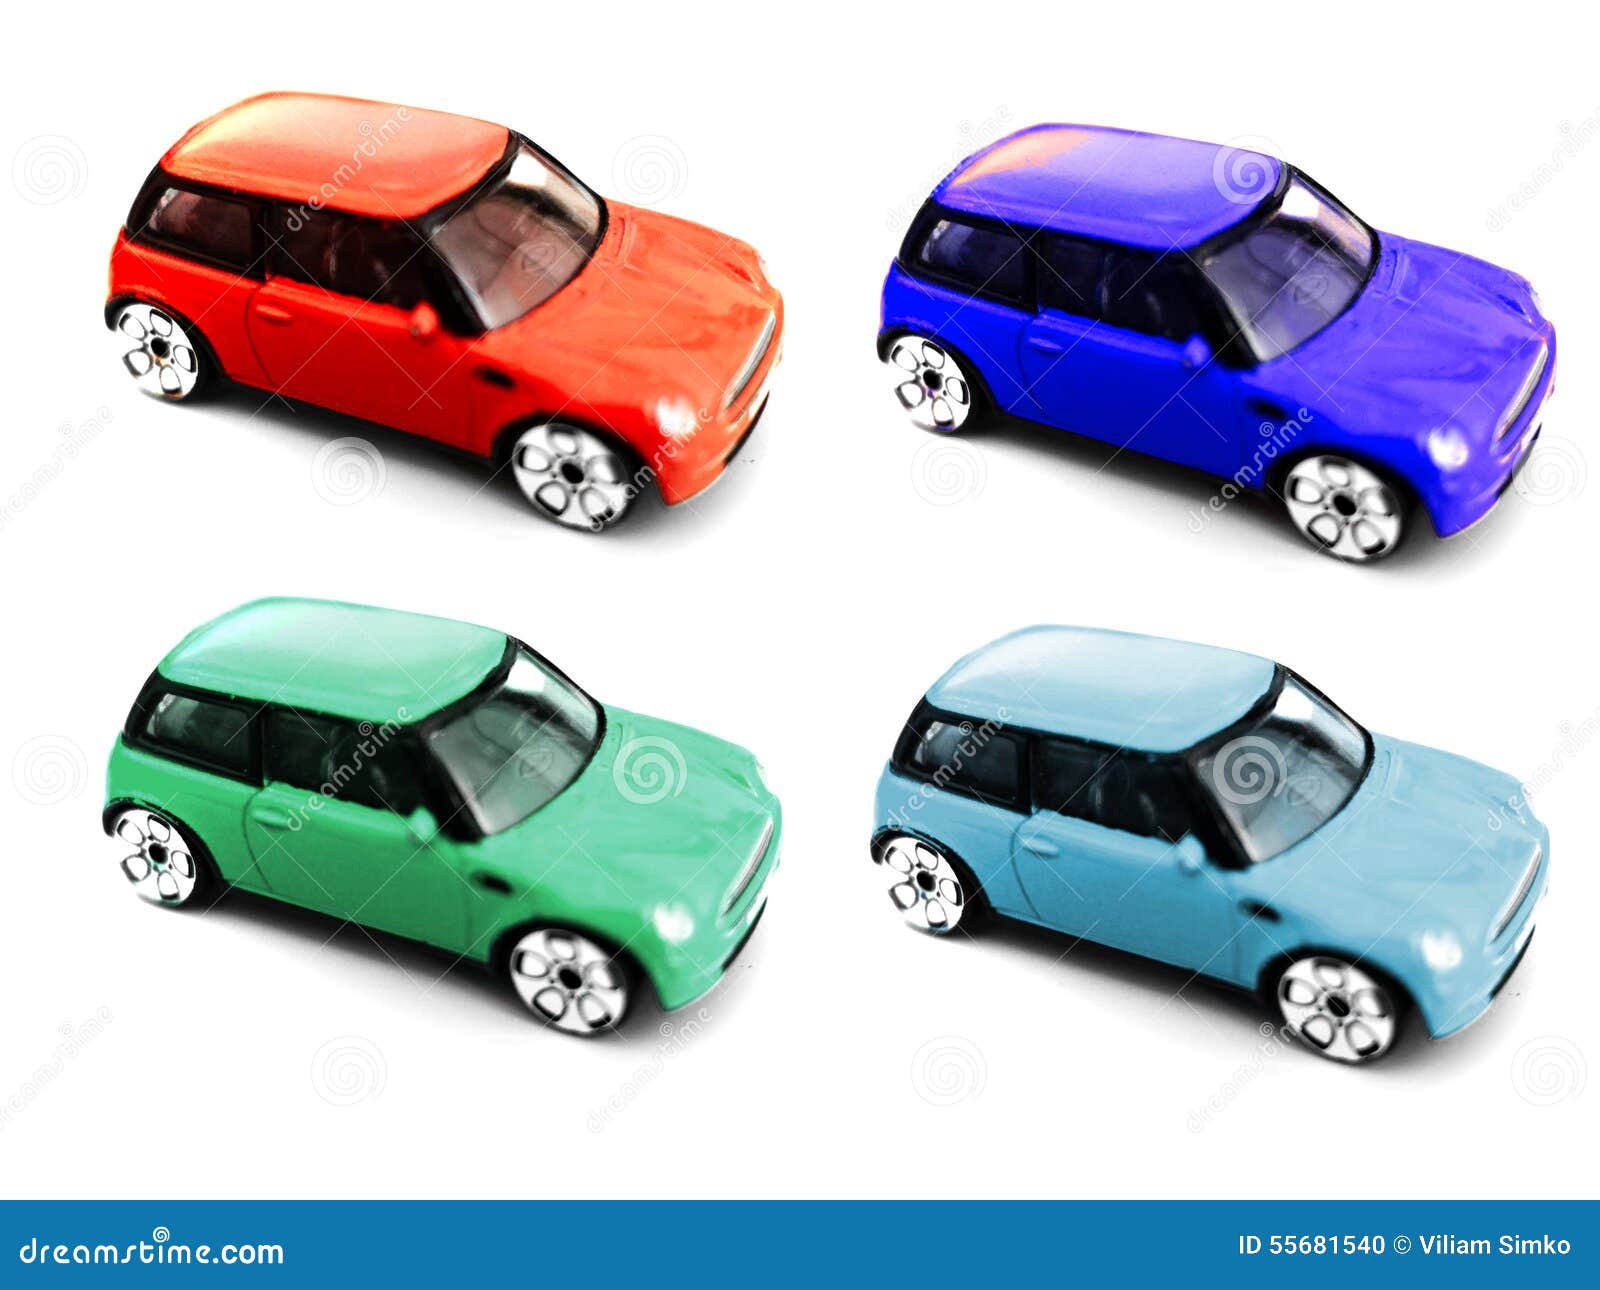 CLISPEED 1:75 Car Models Colorful Small Cars Toys Sand Table Cars Realistic Vehicles Auto Toys for Layout Decorations 50pcs